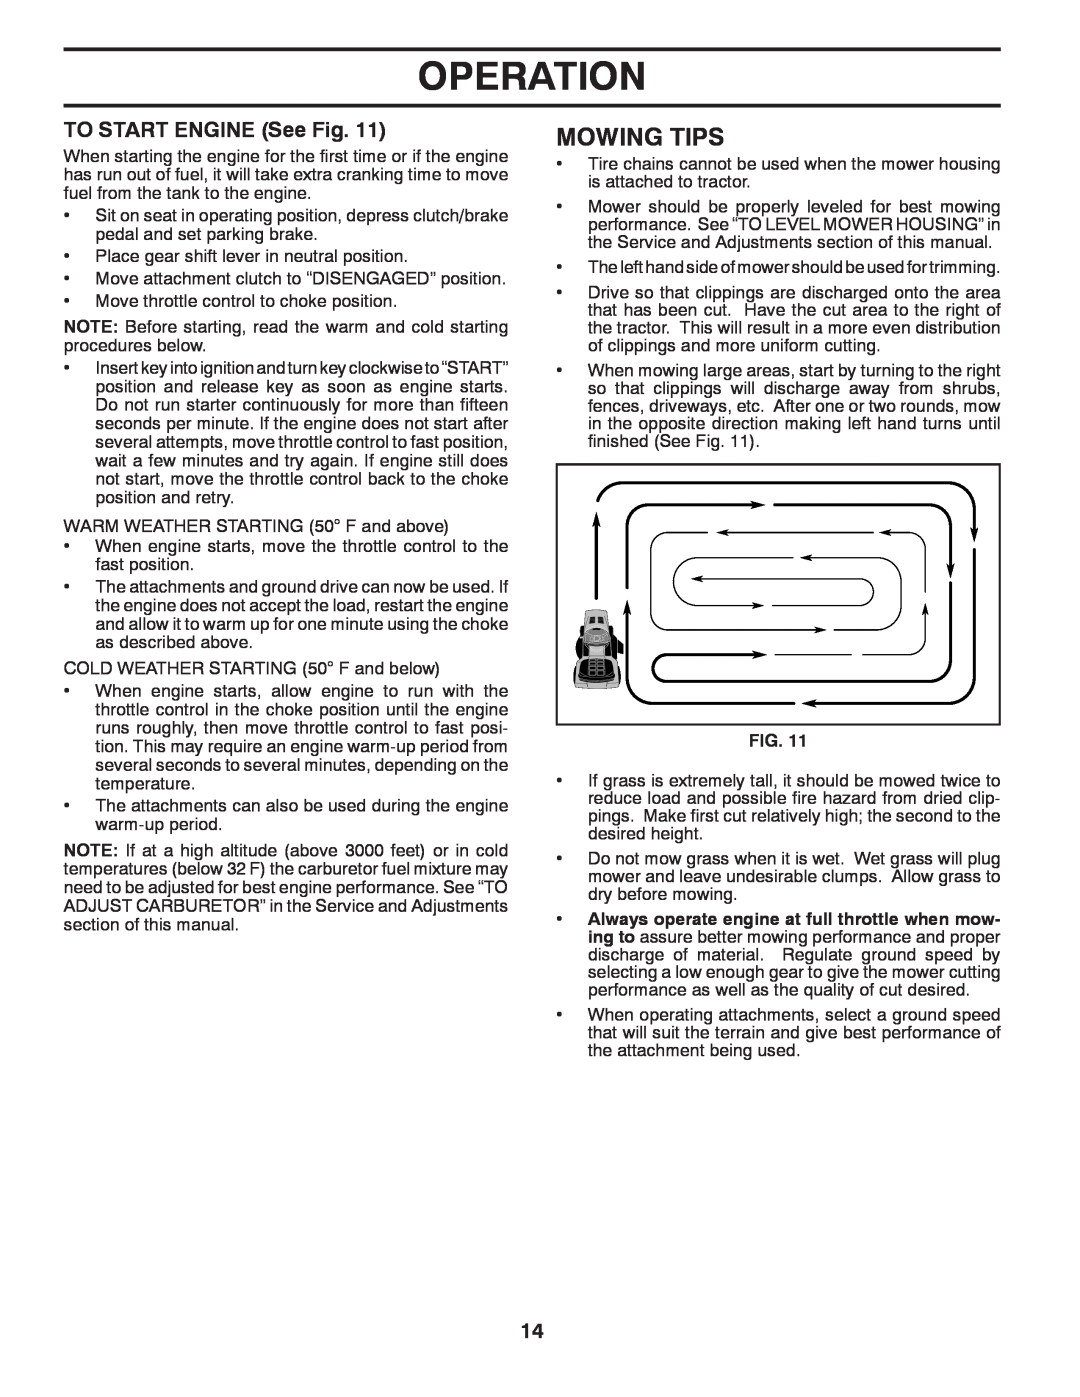 McCulloch 422800 manual Mowing Tips, TO START ENGINE See Fig, Operation 